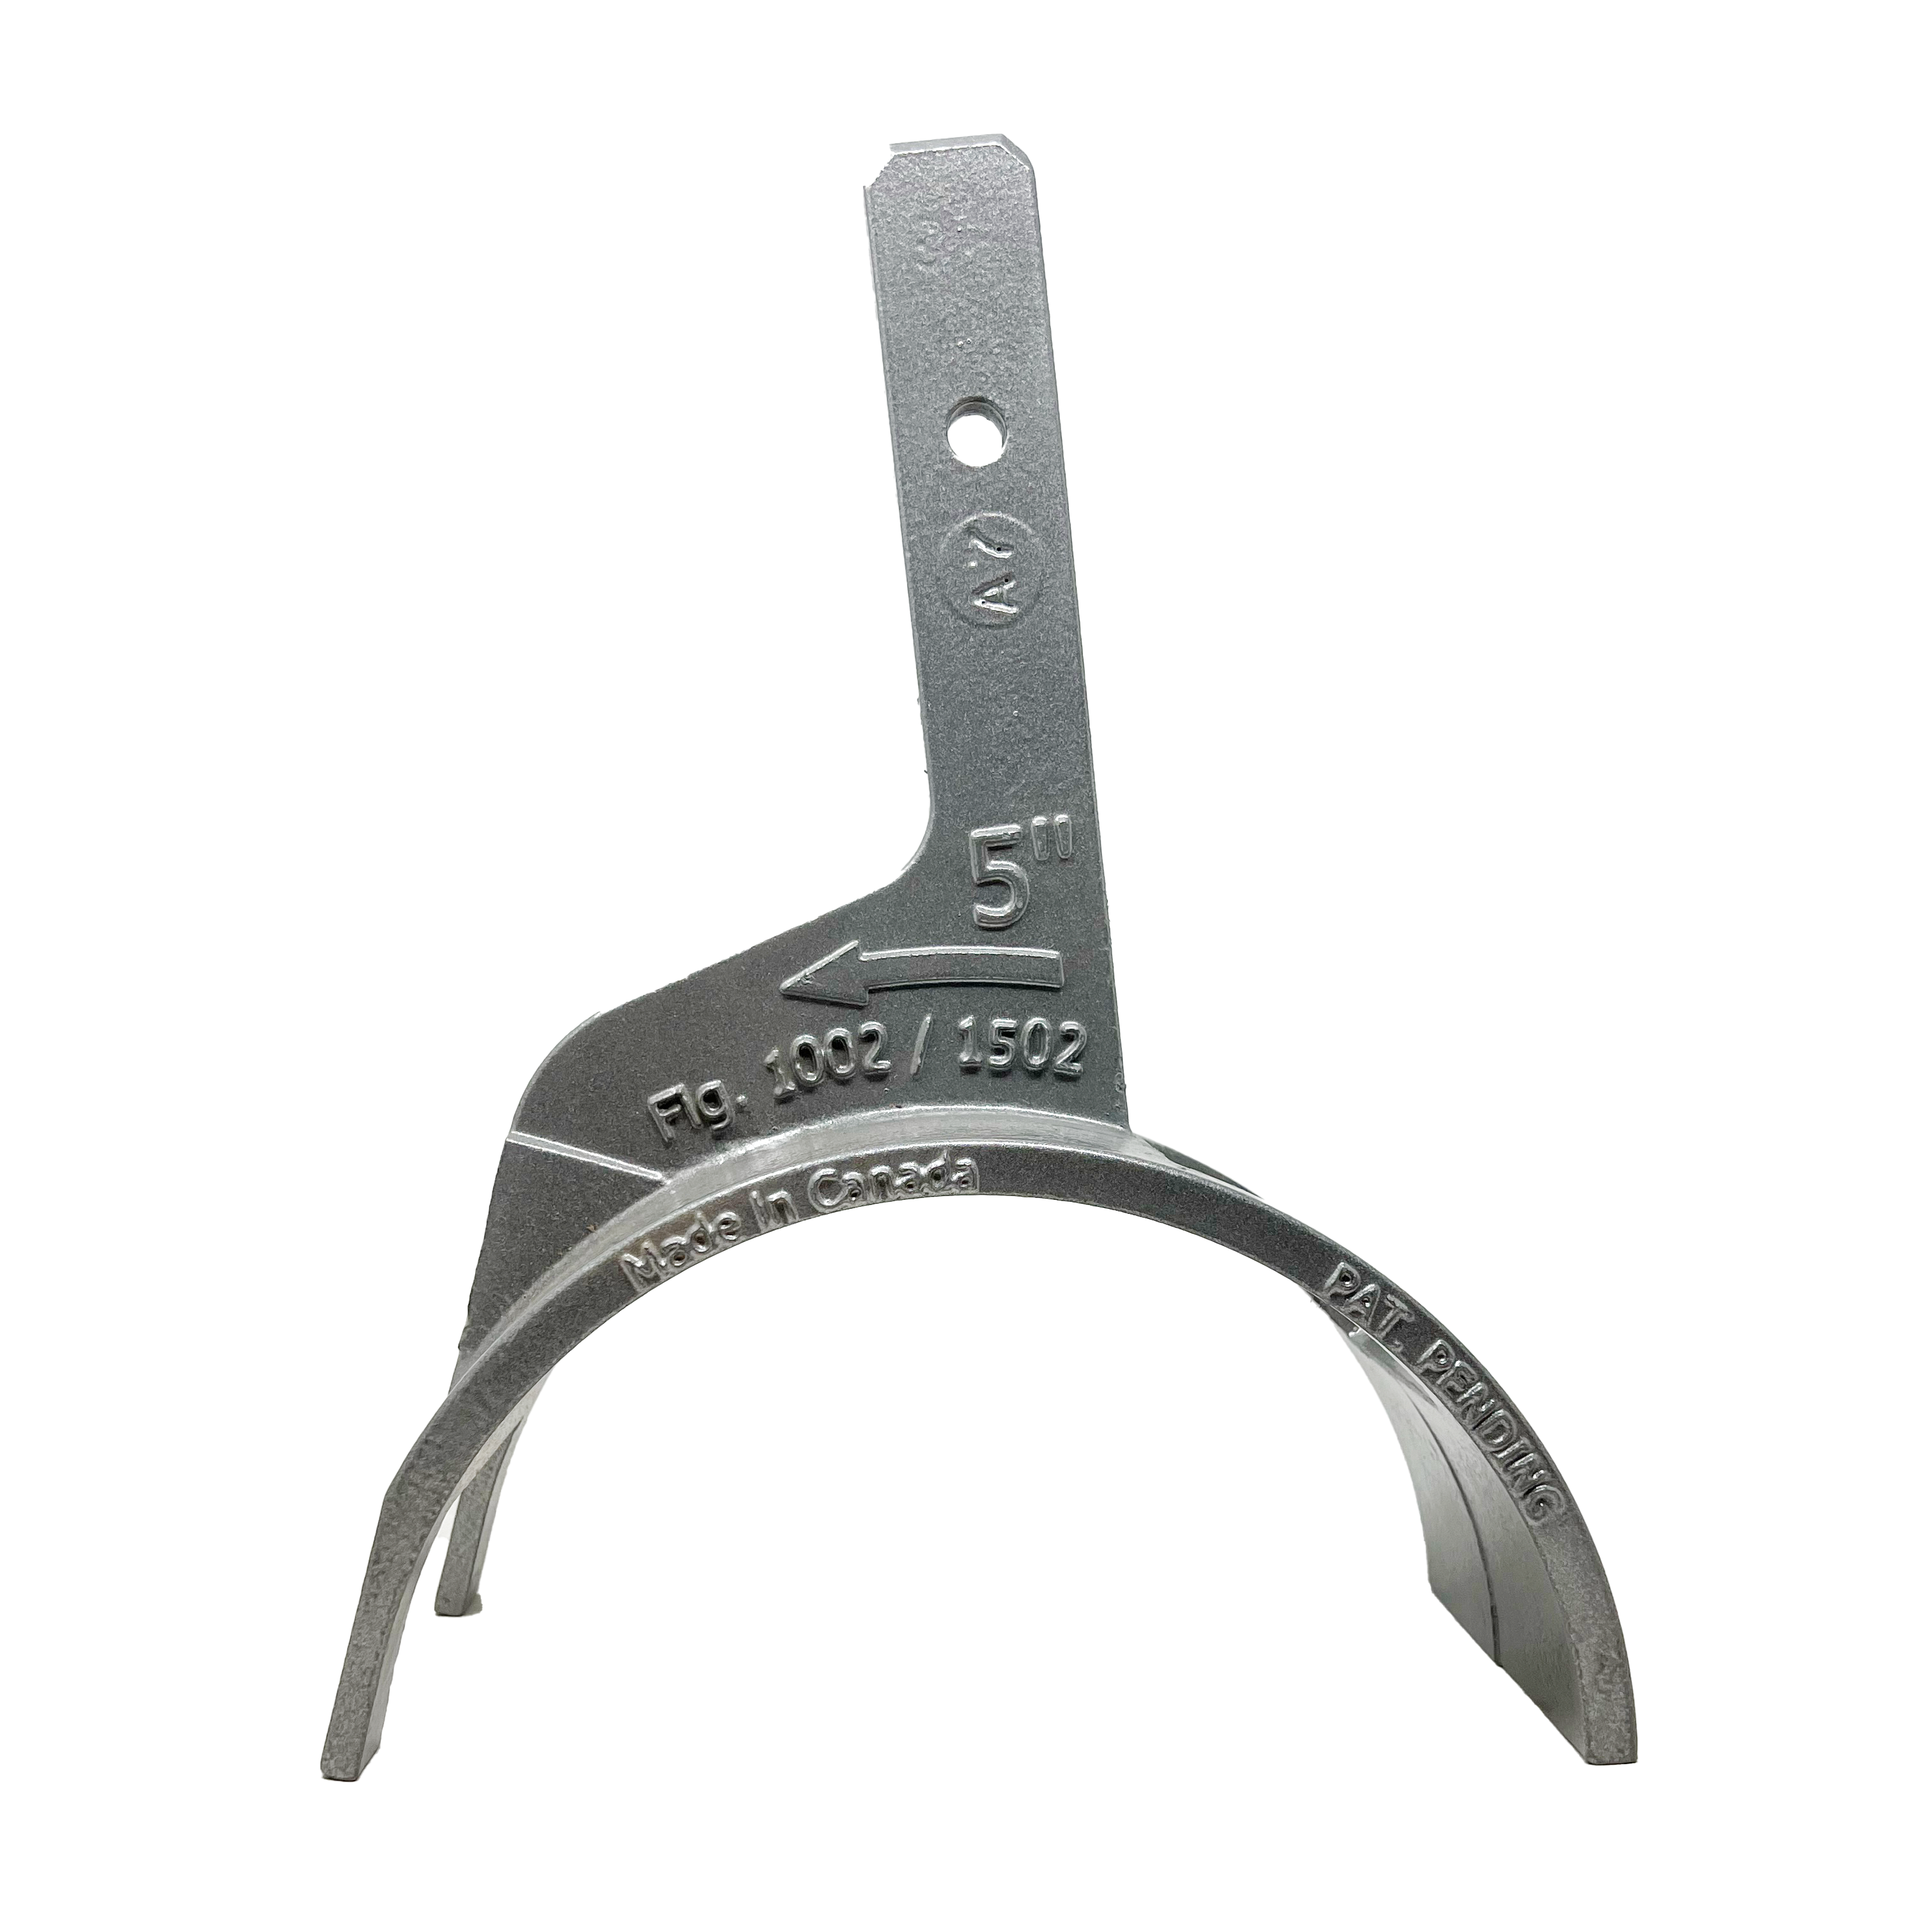 710-0050 HUWE Wrench Head for 5" Figure 1002, Figure 1502